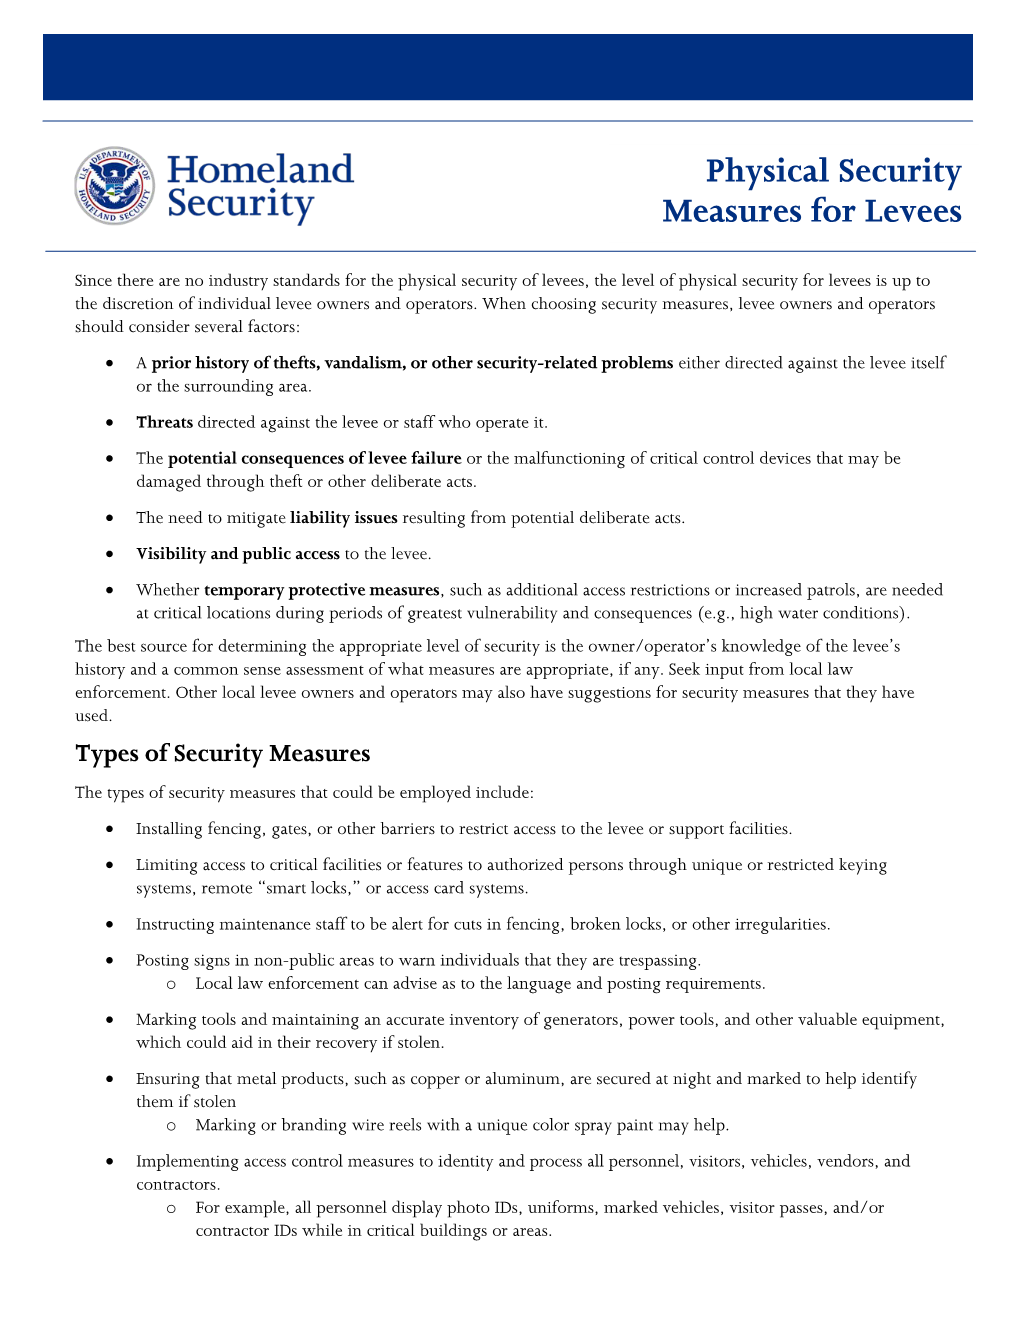 Physical Security Measures for Levees